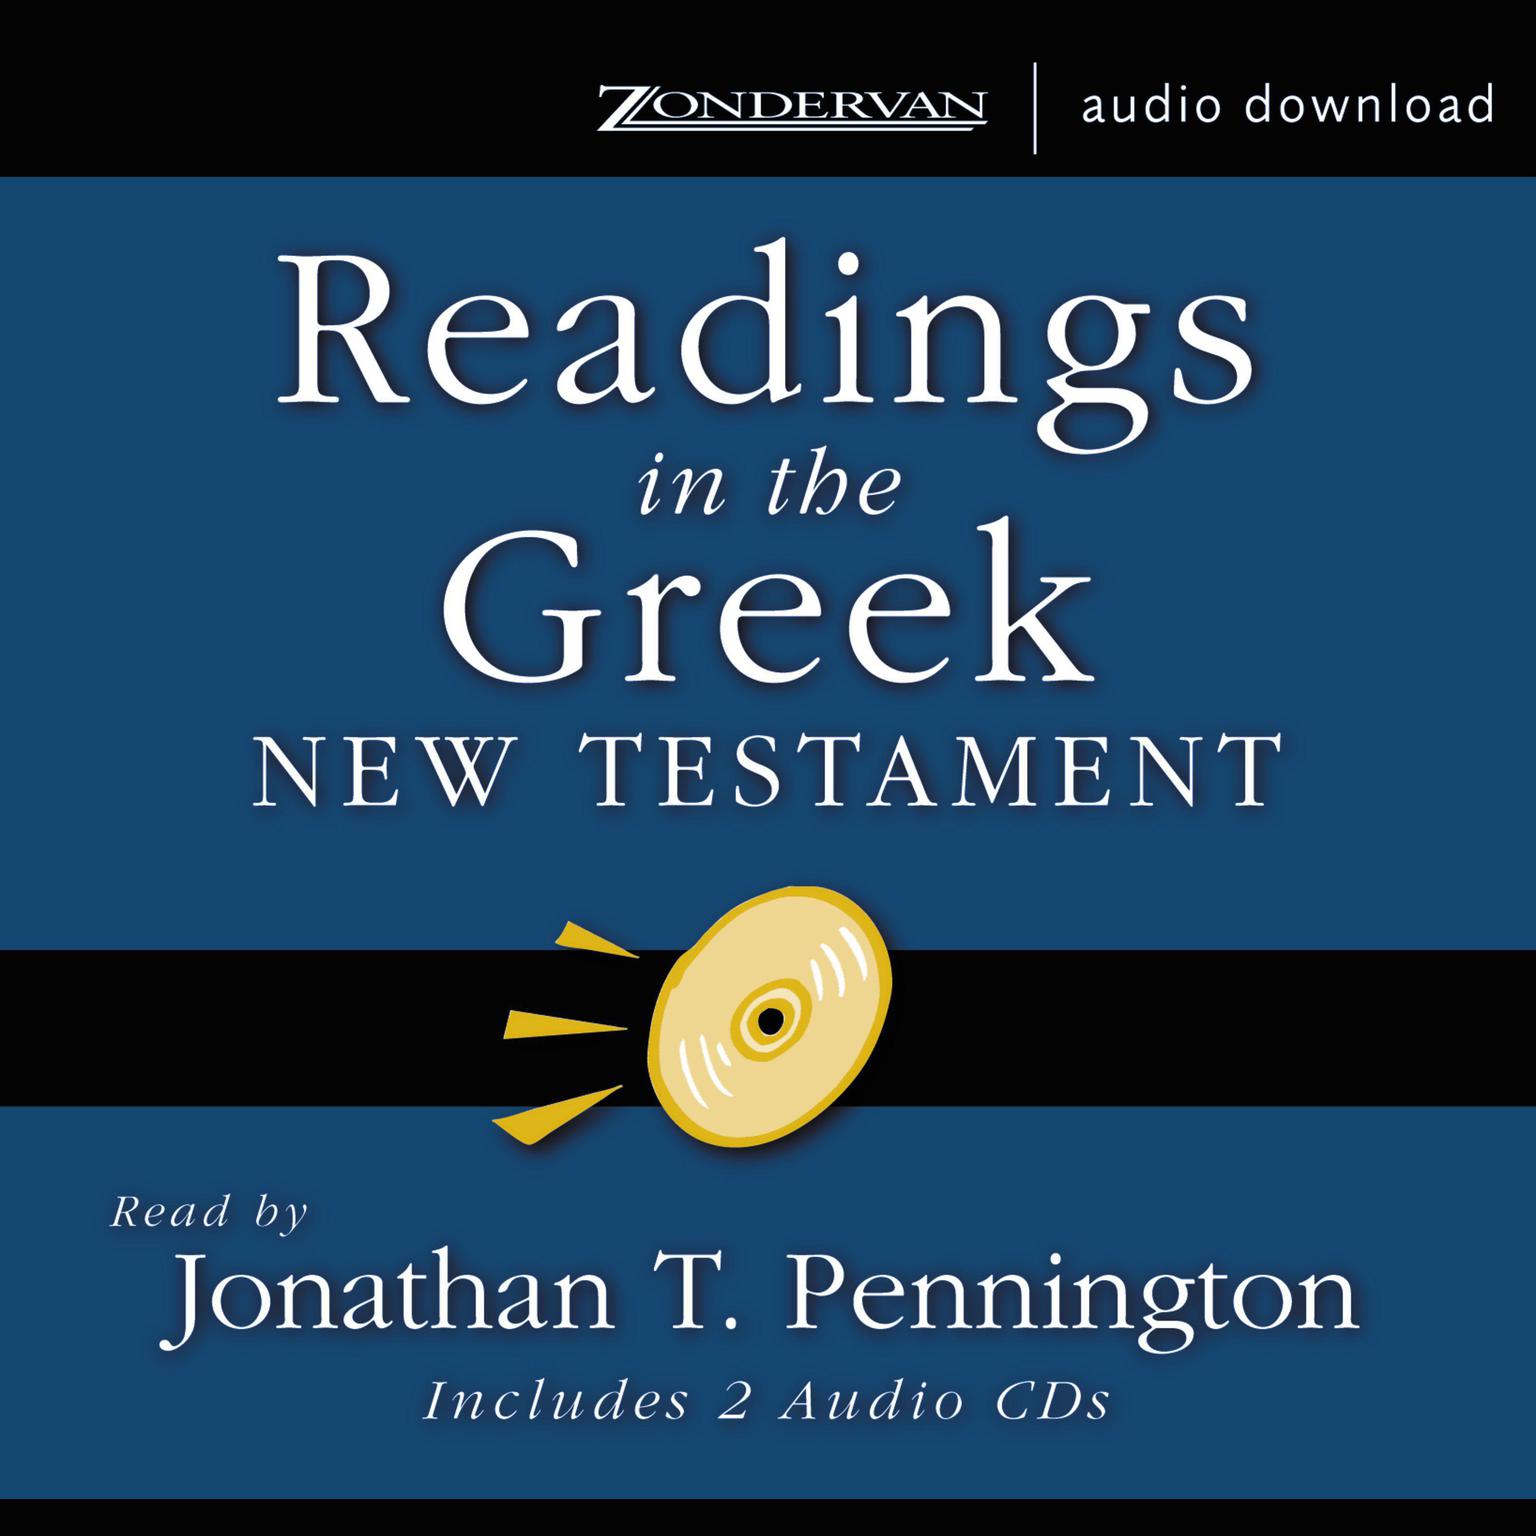 Readings in the Greek New Testament Audiobook, by Jonathan T. Pennington